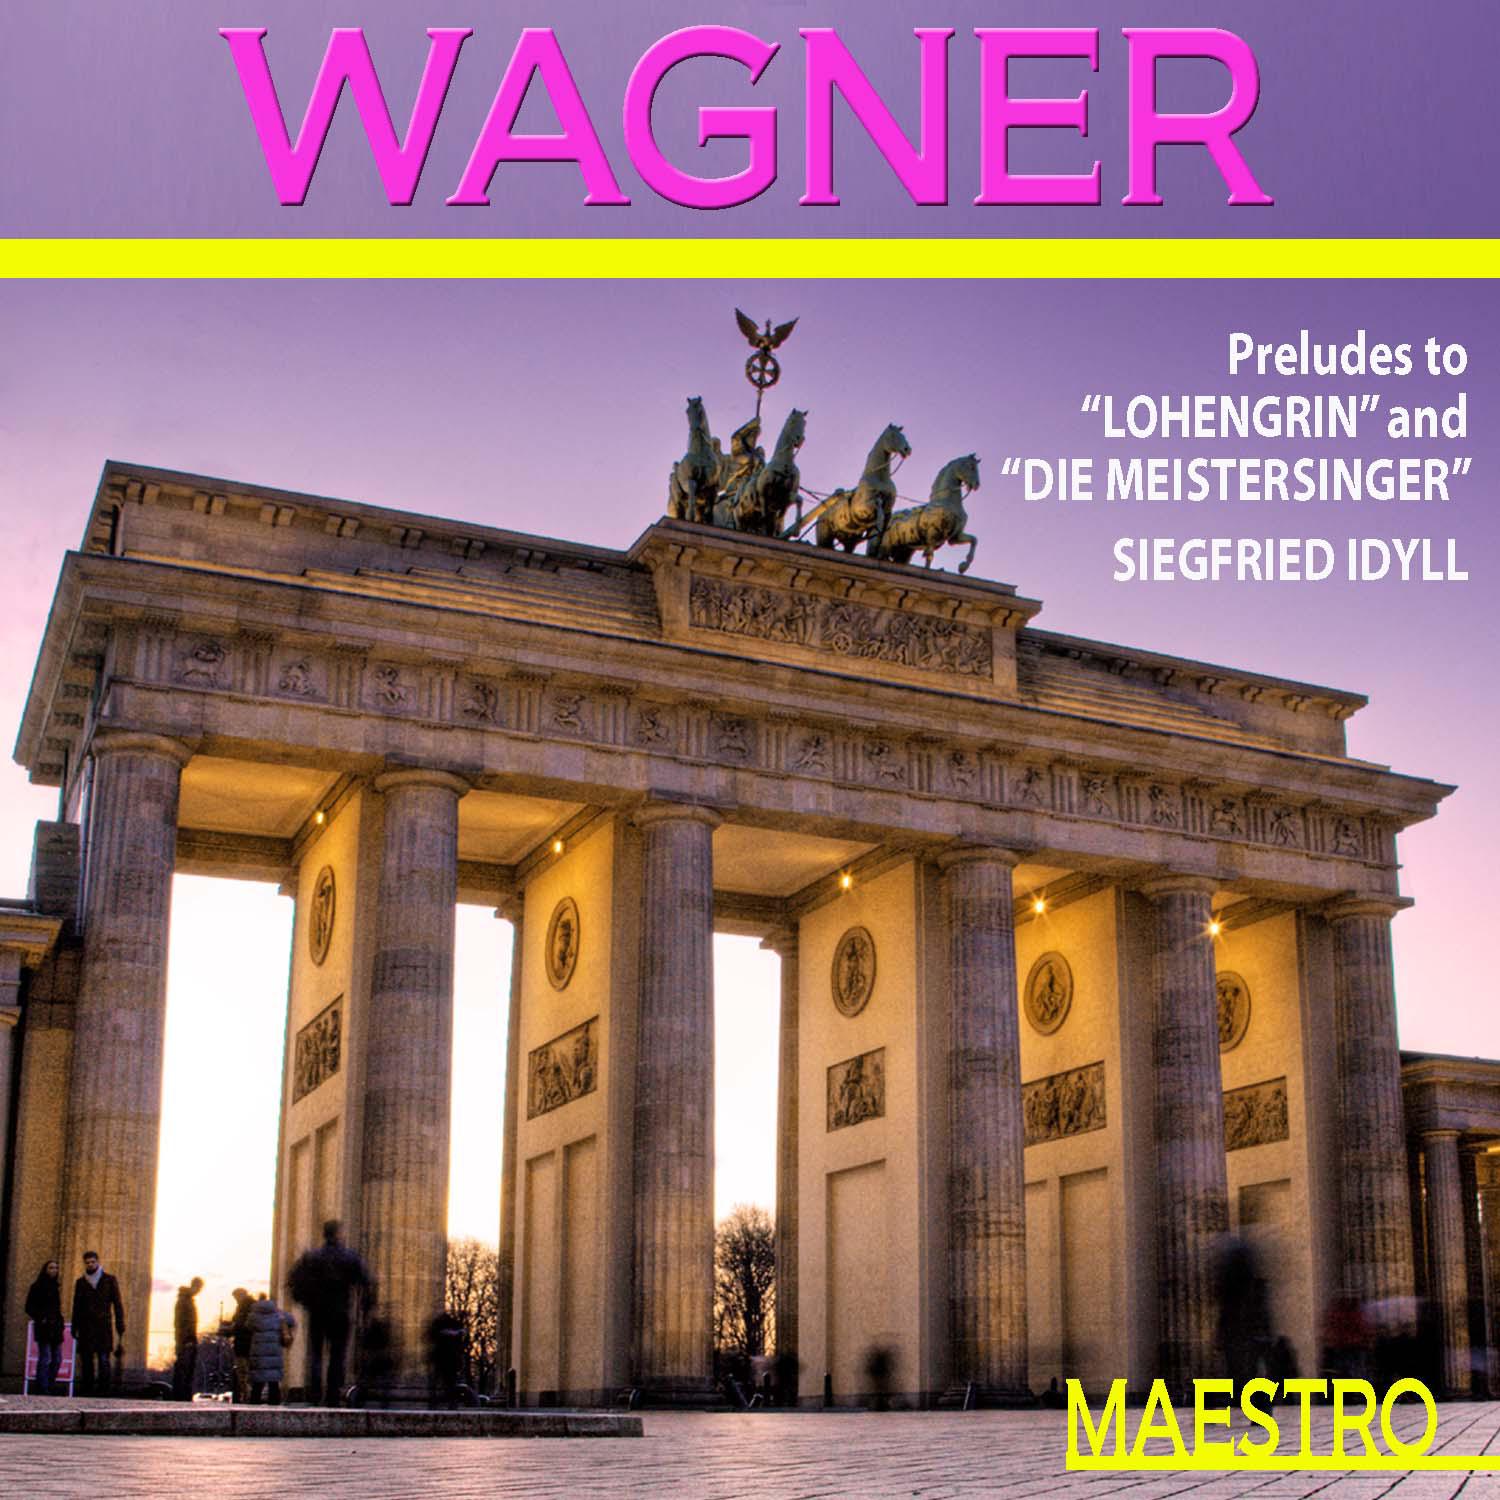 Wagner: Preludes To "Lohengrin" And "Die Meistersinger", Siegfried Idyll